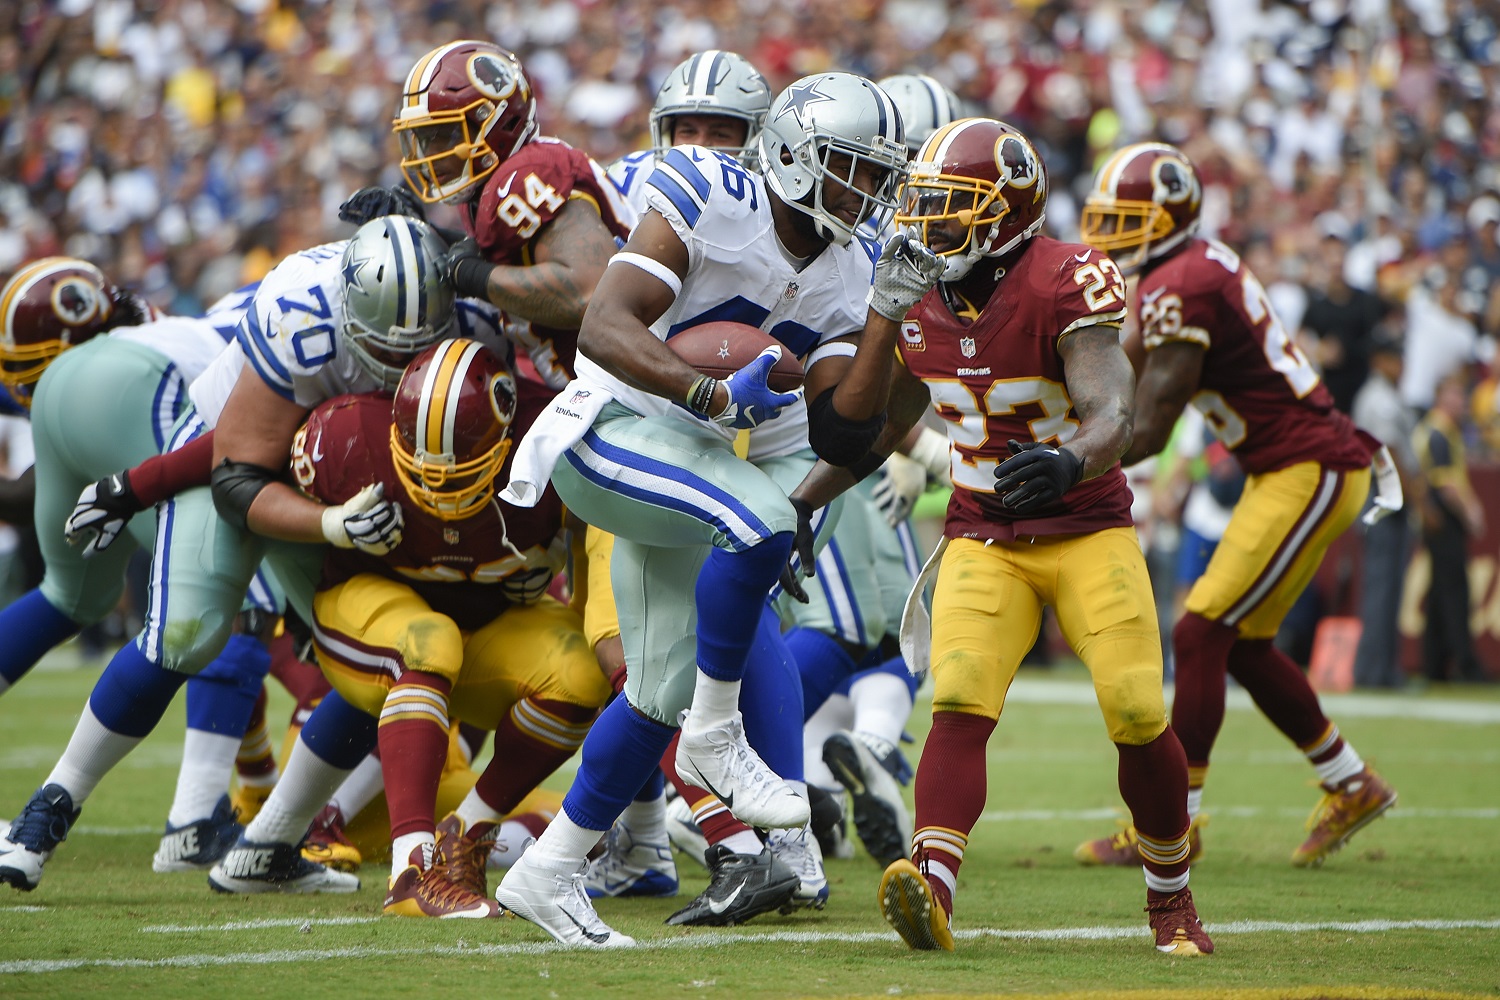 Dallas Cowboys running back Albert Morris (46) carries the ball into the end zone for a touchdown past Washington Redskins free safety DeAngelo Hall (23) during the second half of an NFL football game in Landover, Md., Sunday, Sept. 18, 2016. (AP Photo/Nick Wass)